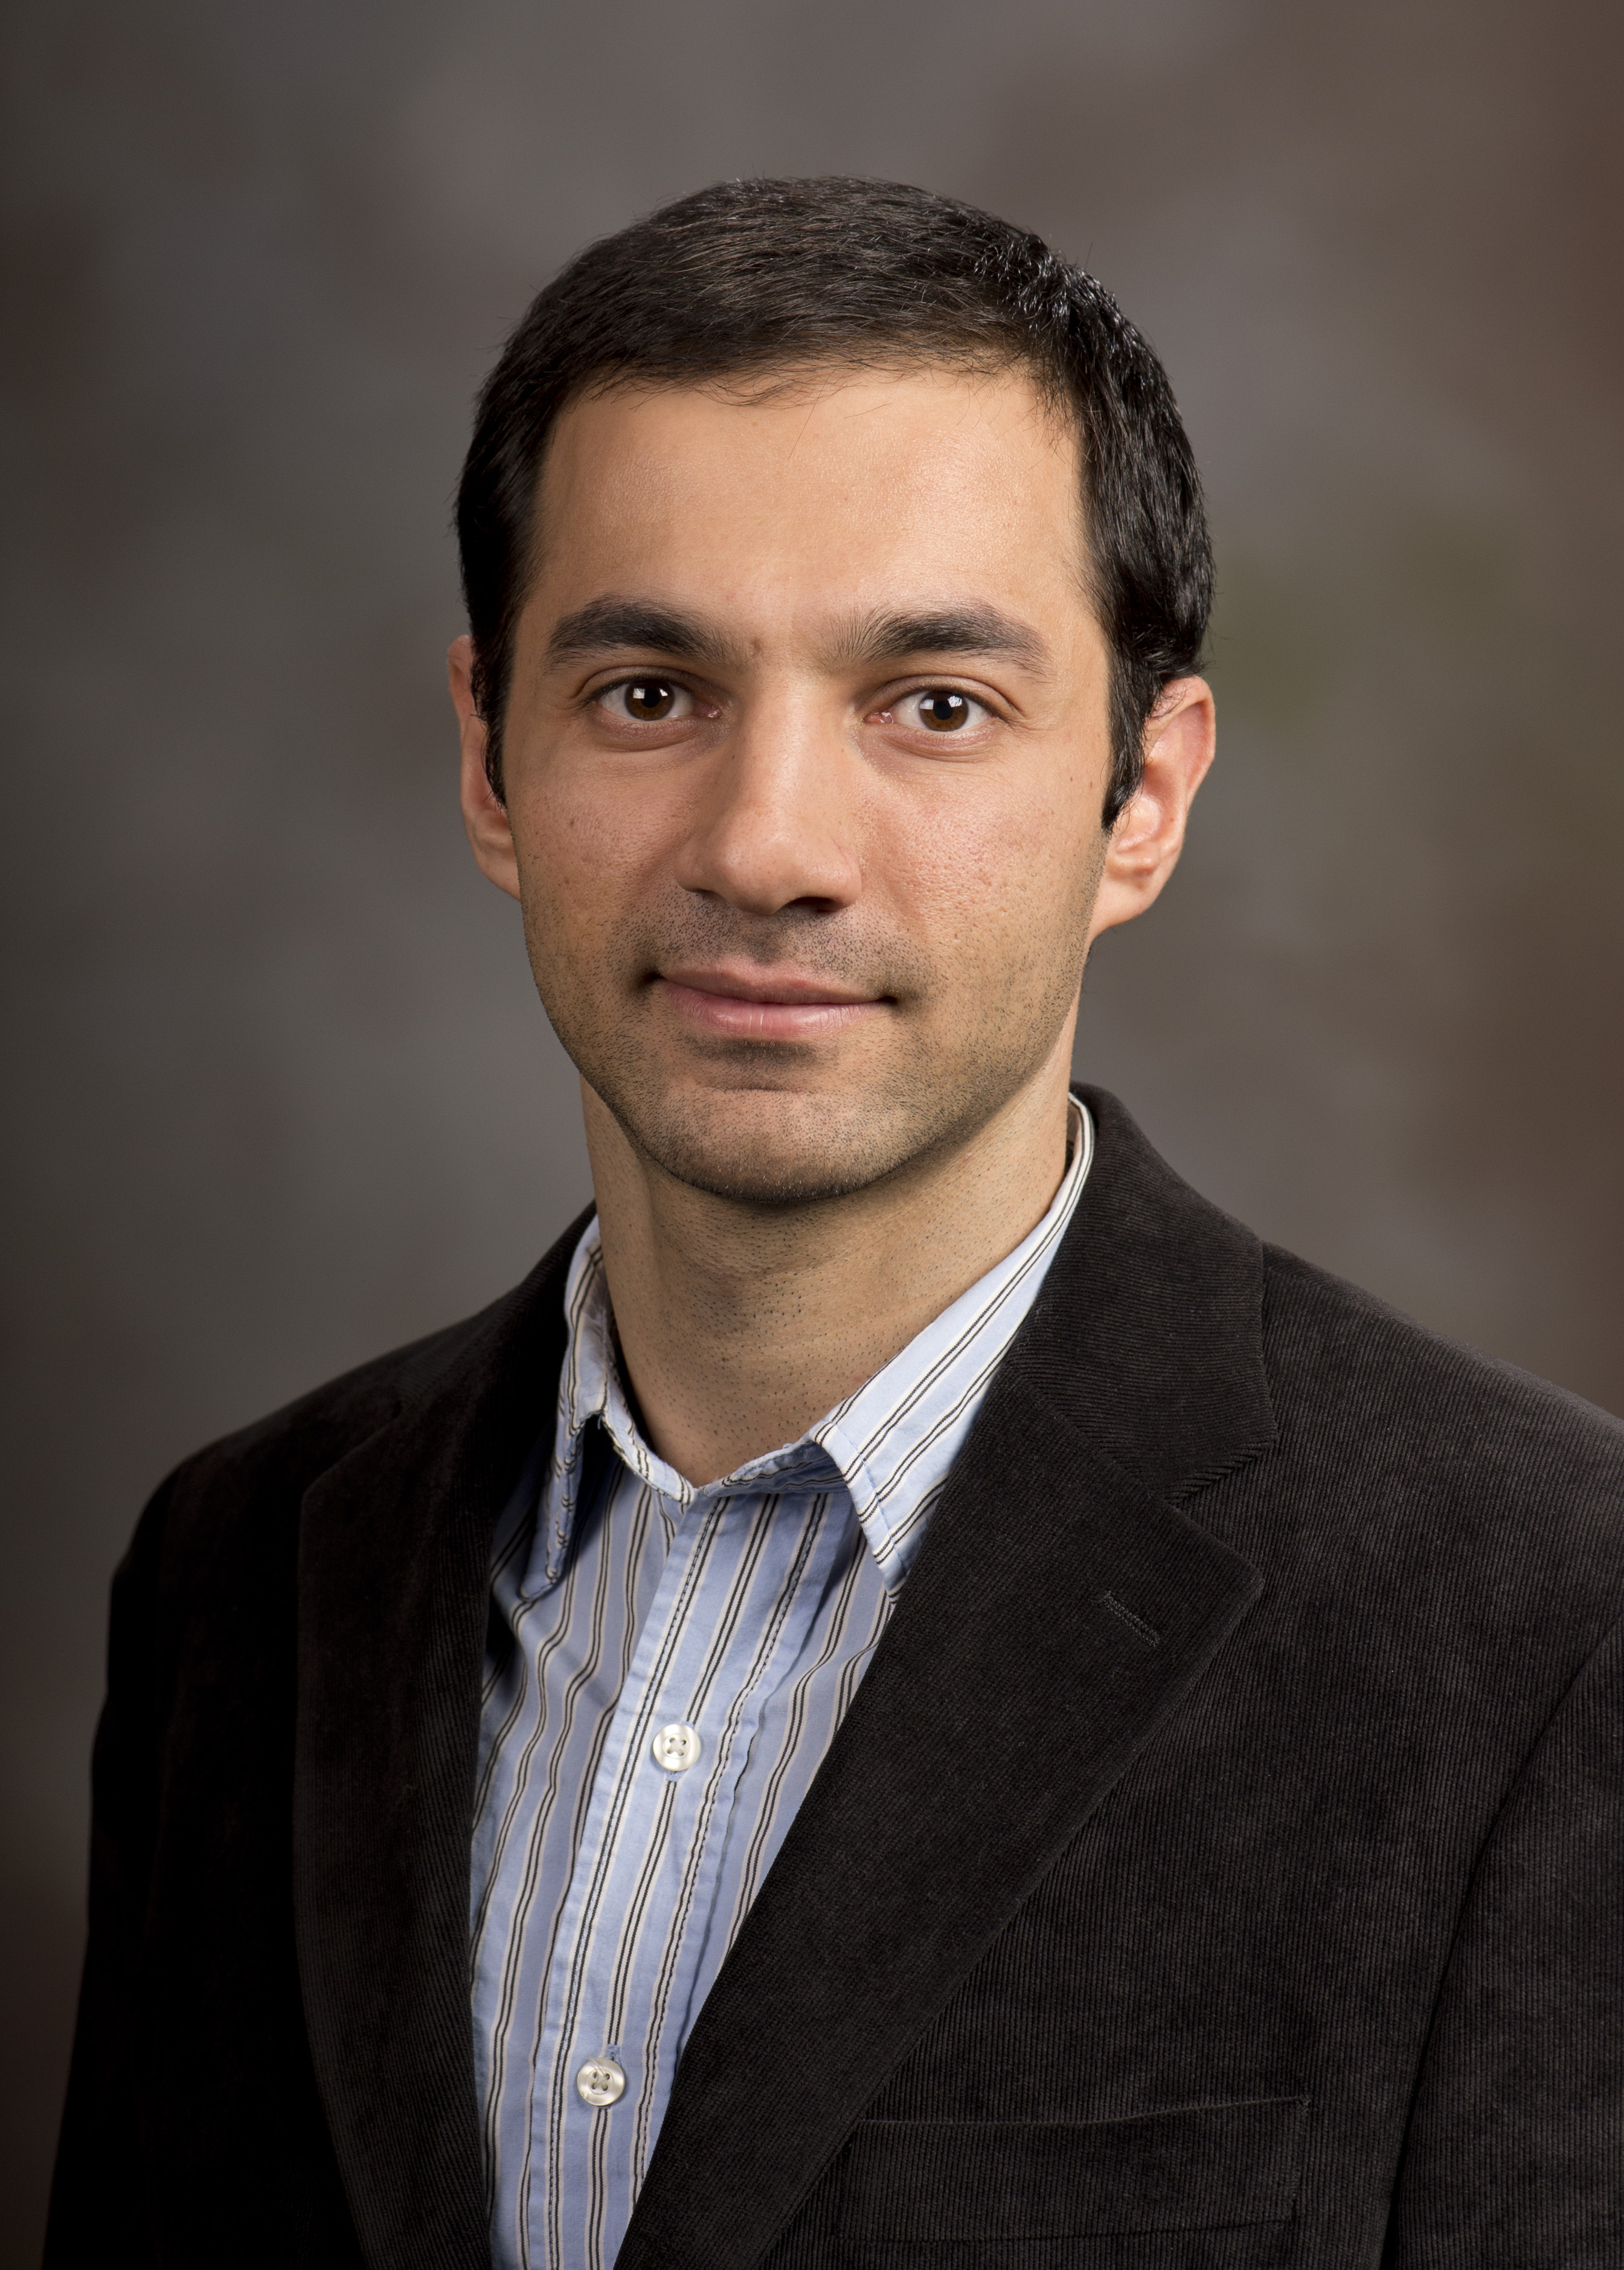 Mohammad Saied, Virginia Tech doctoral and master's degree alumnus, won a master's thesis award